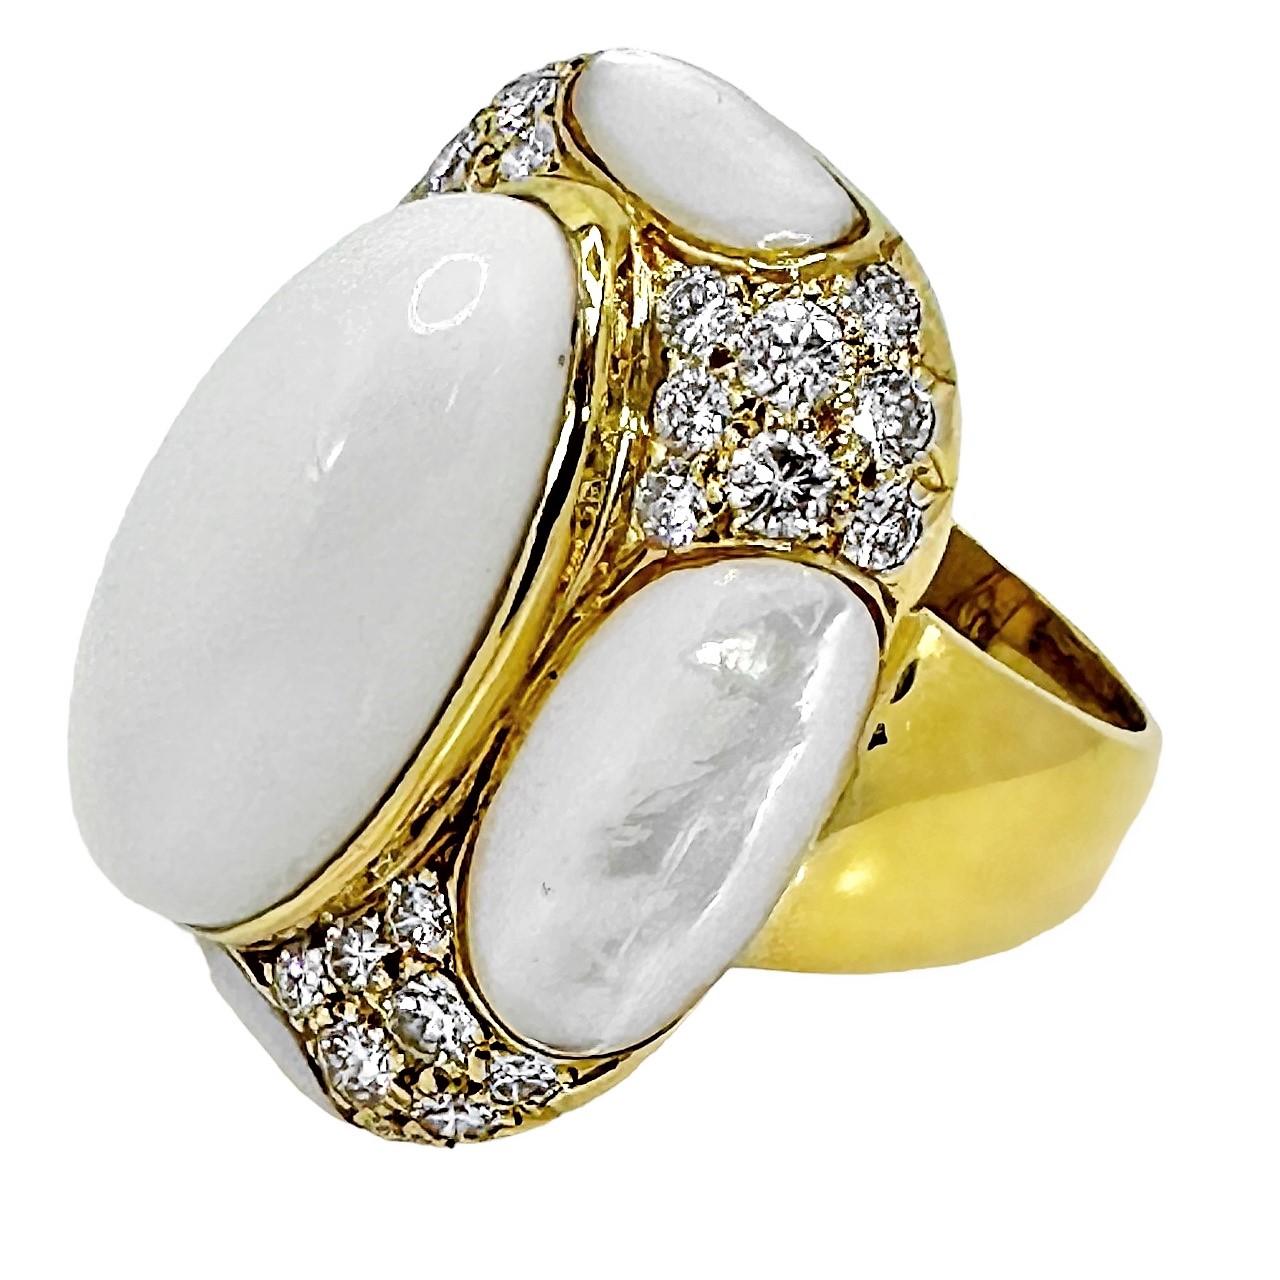 Brilliant Cut Outstanding 18k Yellow Gold, White Onyx, M.O.P. & Diamond Ring by Albert Lipten For Sale